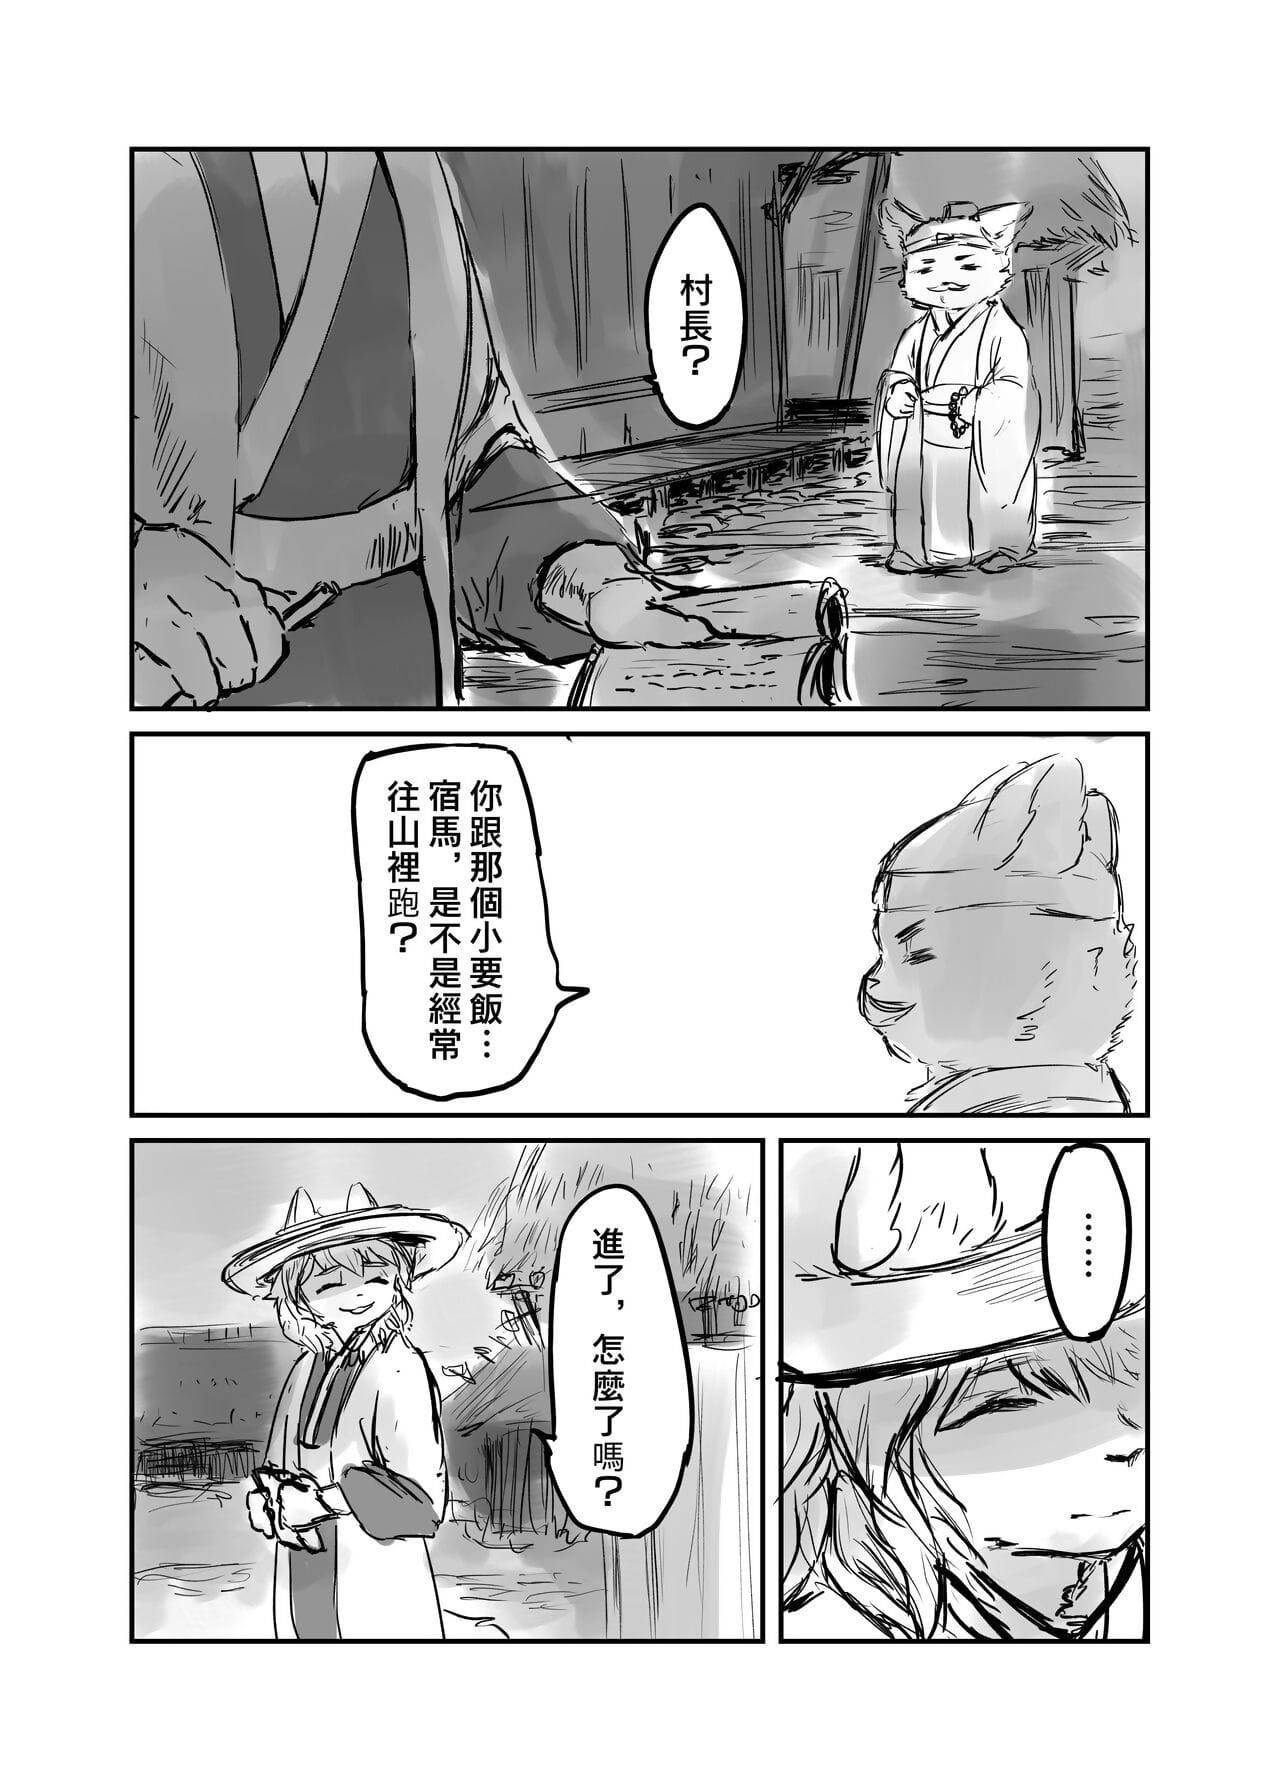 （the 방문자 他乡之人 by：鬼流 page 1